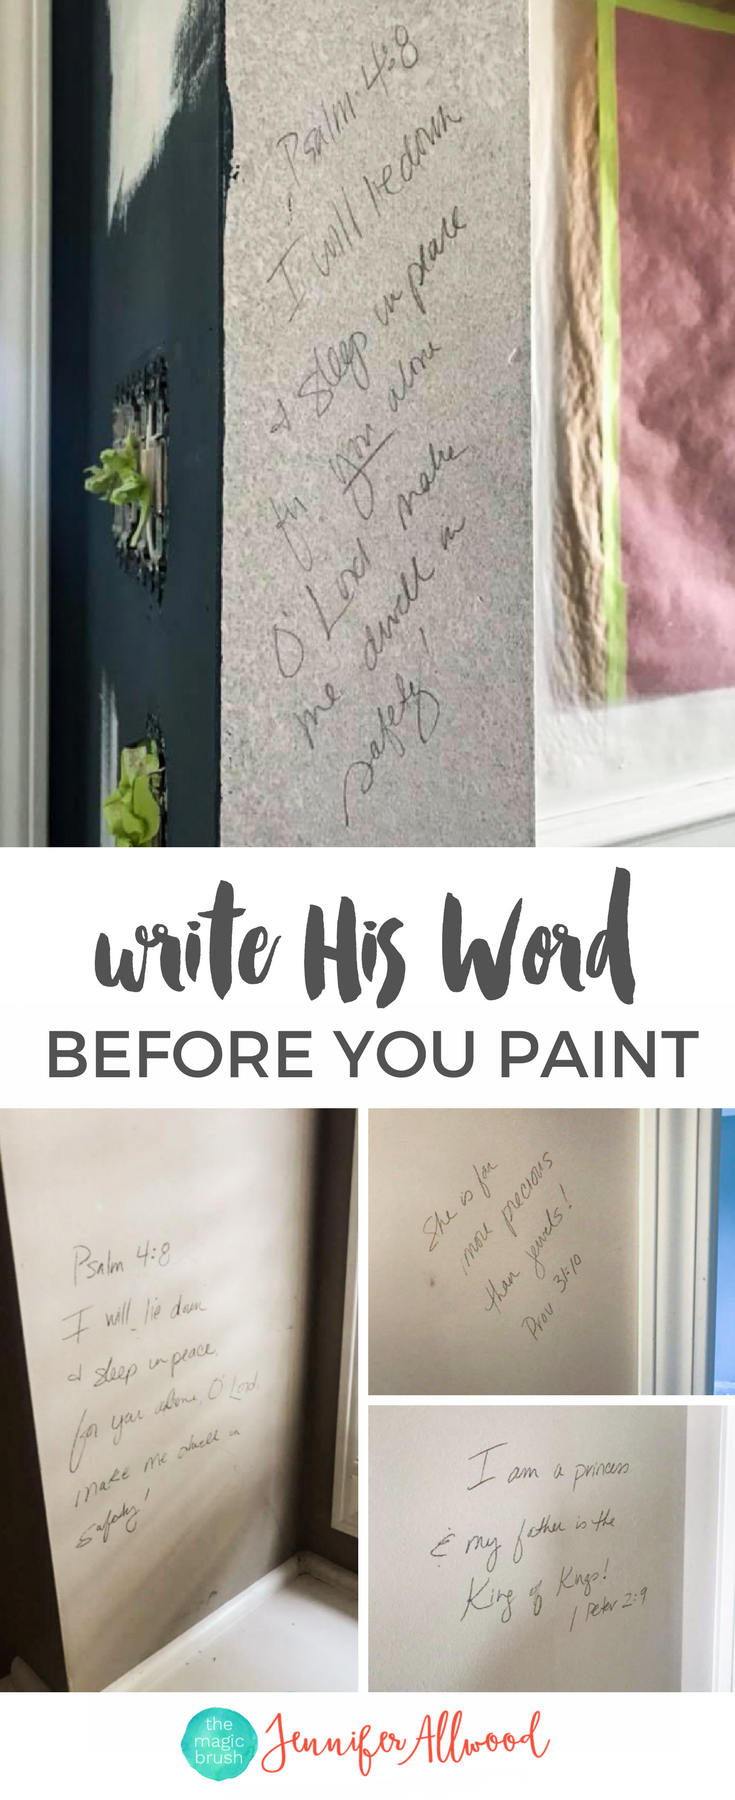 Writing Bible Scriptures on Walls before you paint by Jennifer Allwood | remodeling tips | Painting Tips | How to Prep before you Paint Walls #paintingtips #paintingrooms